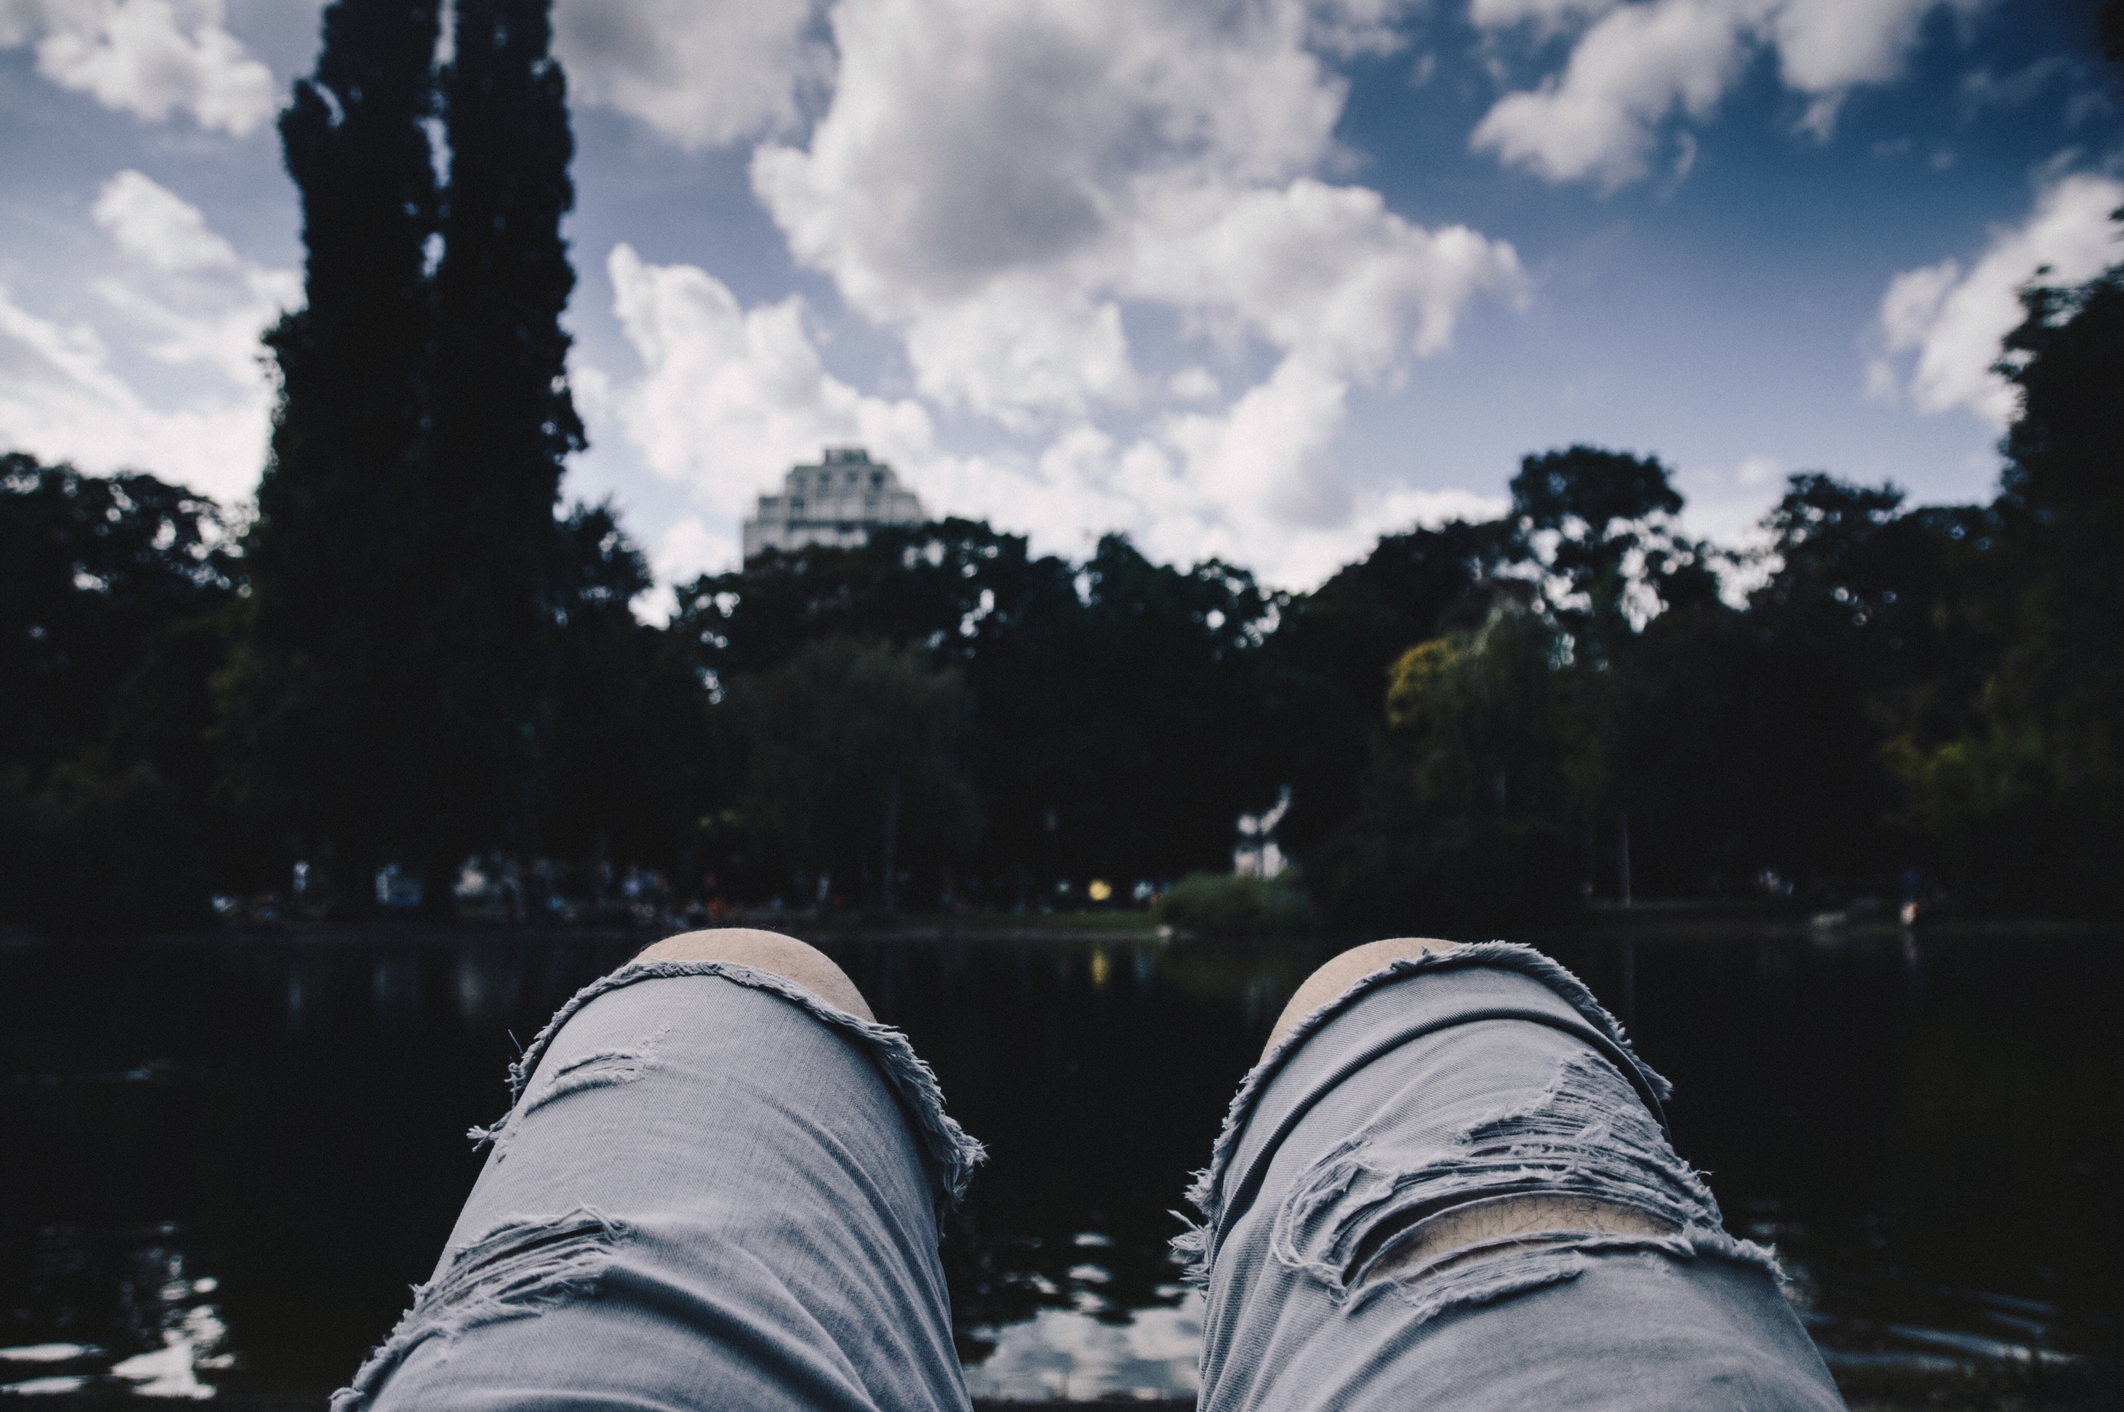 A pair of legs in ripped jeans looking up at trees and the sky